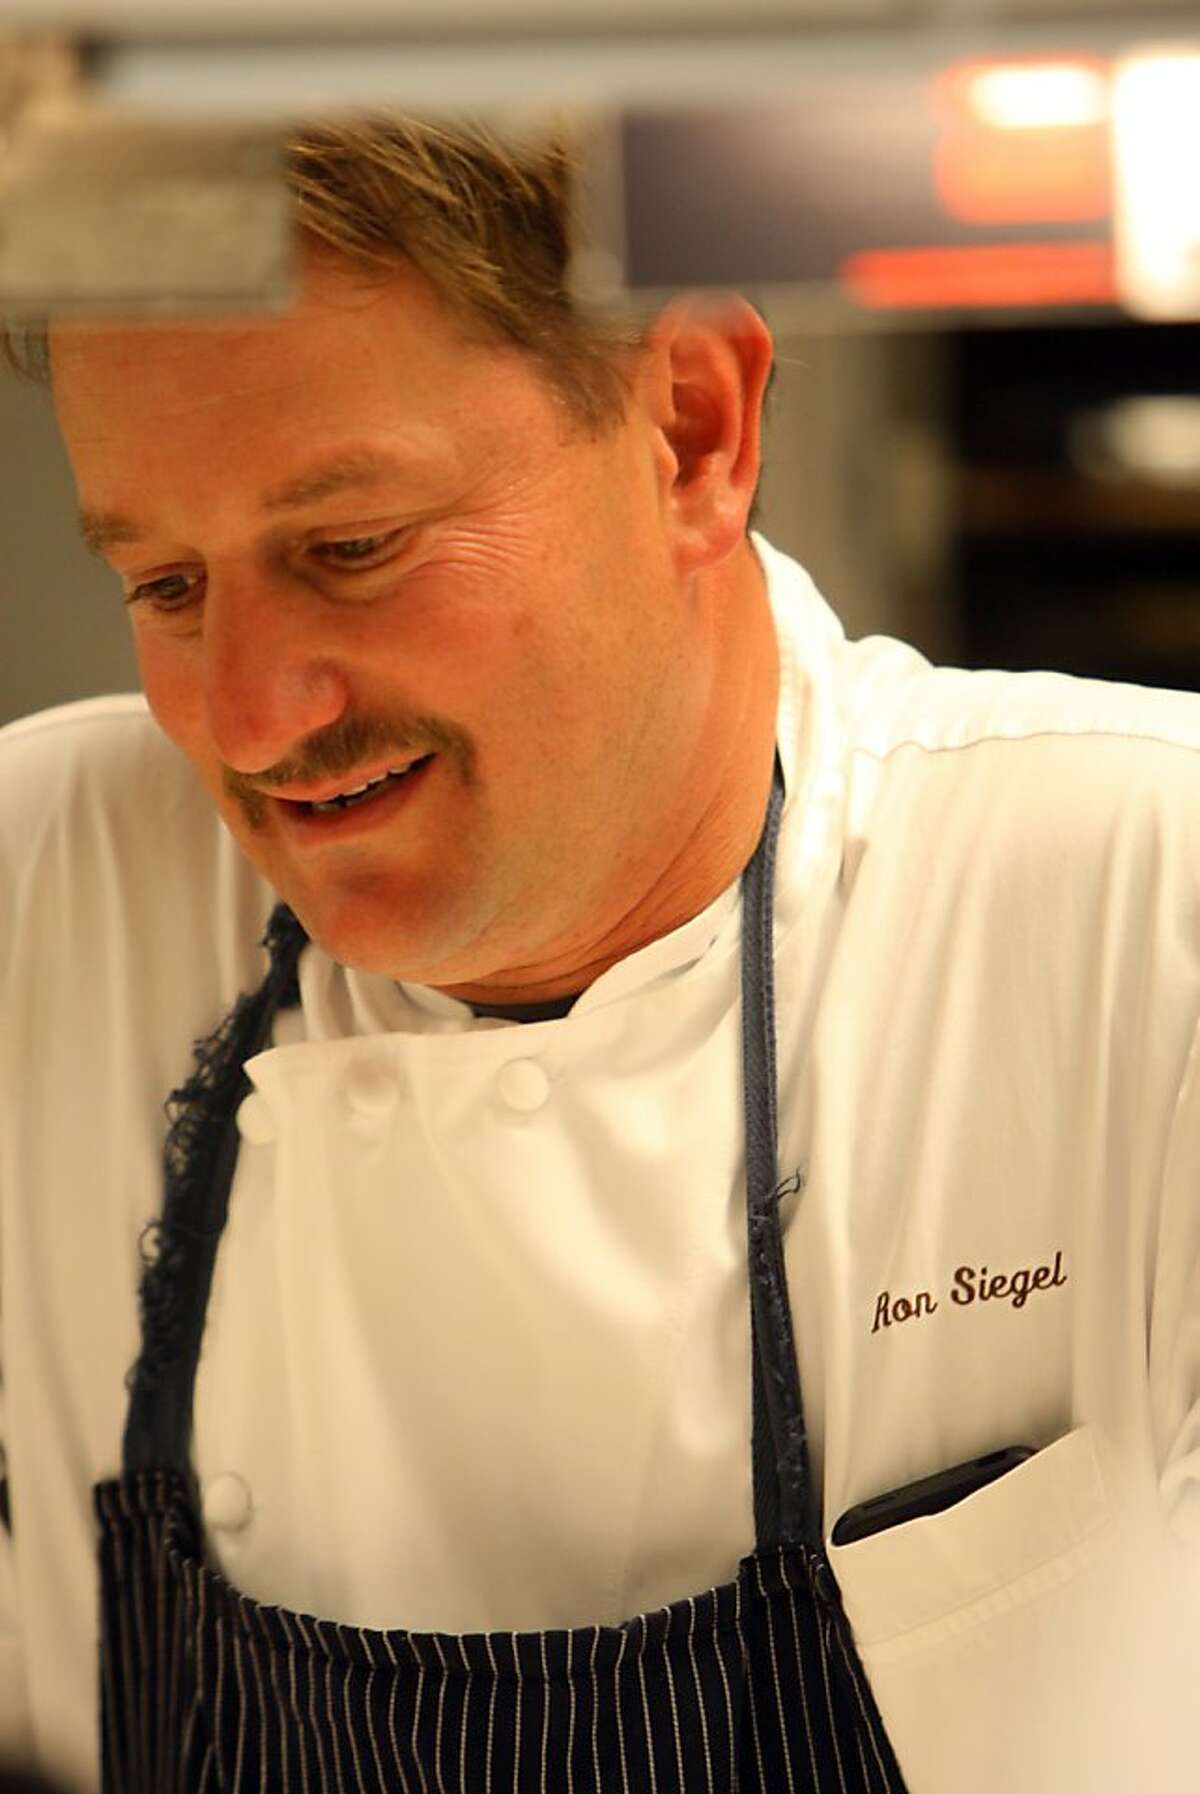 Ron Siegel inspects his dish before it's served at Michael Mina restaurant in San Francisco, Calif., on Sunday, Oct. 9, 2011. Some of the top chefs in the Bay Area gathered to raise money for Ronnie Lott's All Stars for Kids charity.